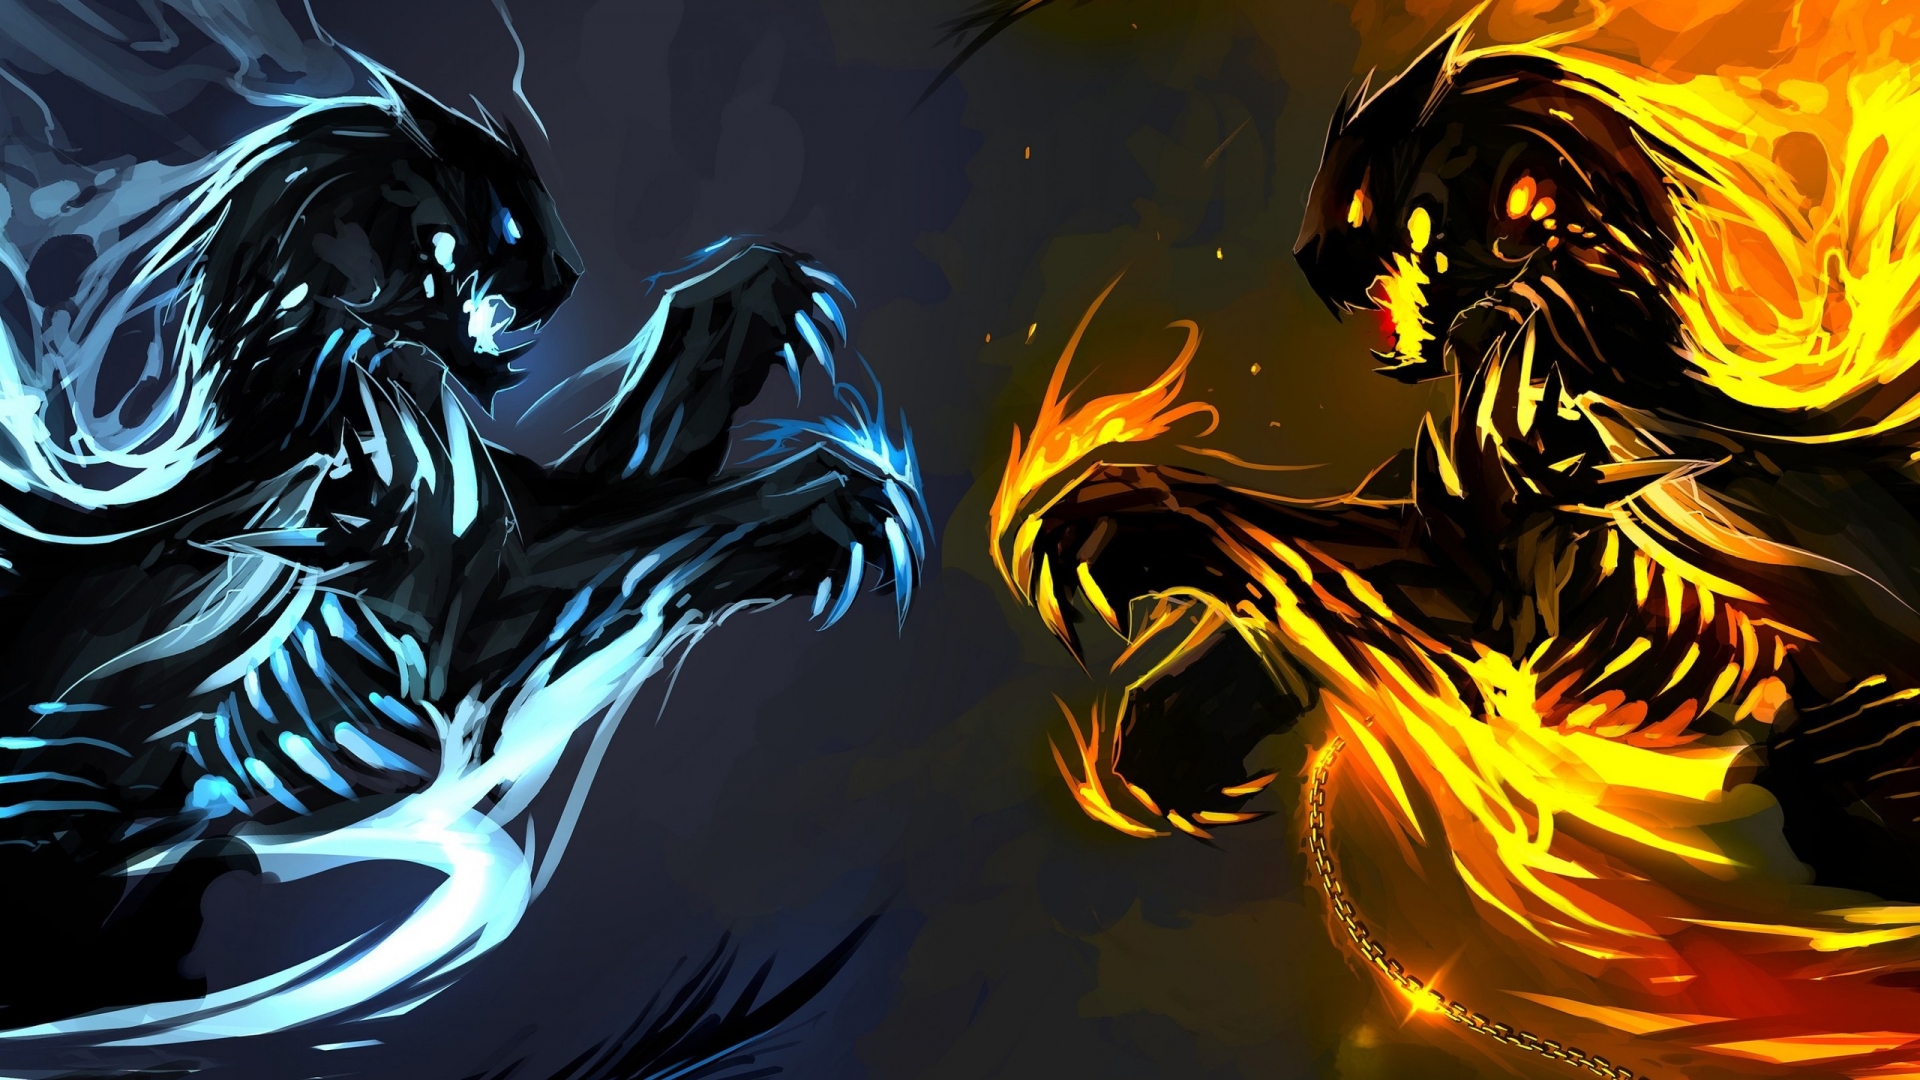 Ice and Fire Dragons for 1920 x 1080 HDTV 1080p resolution